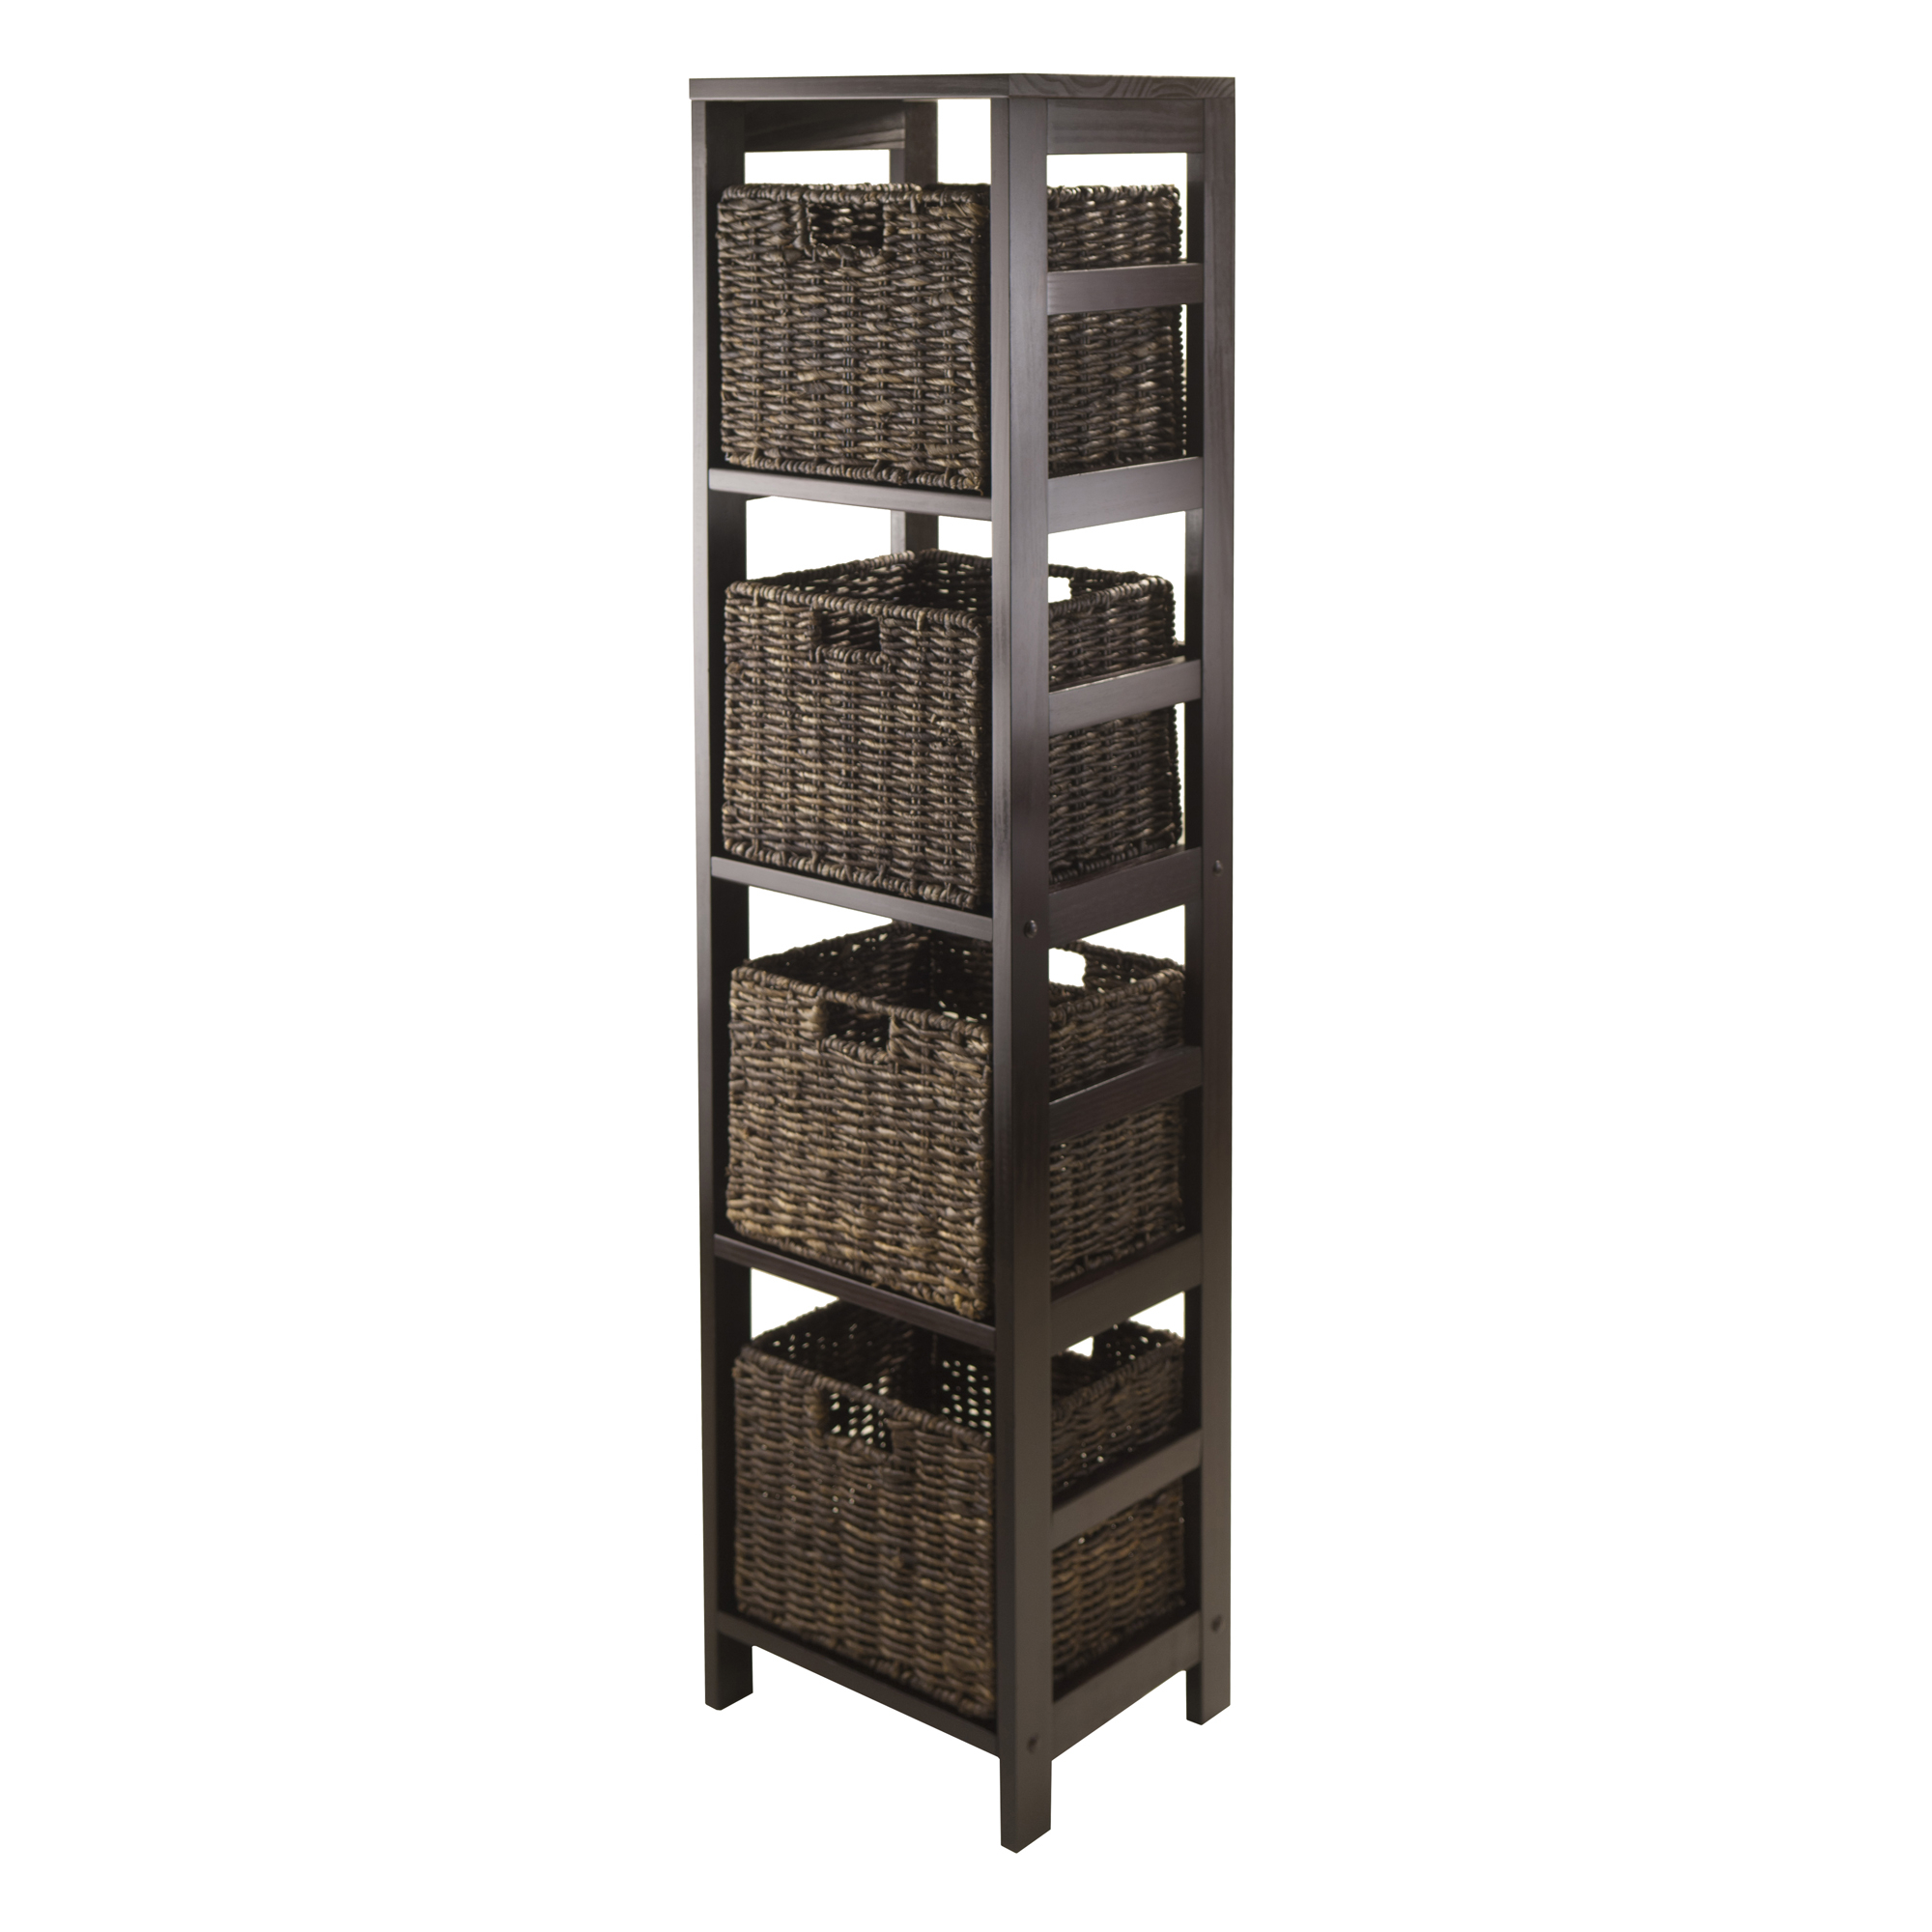 Storage tower with baskets 23